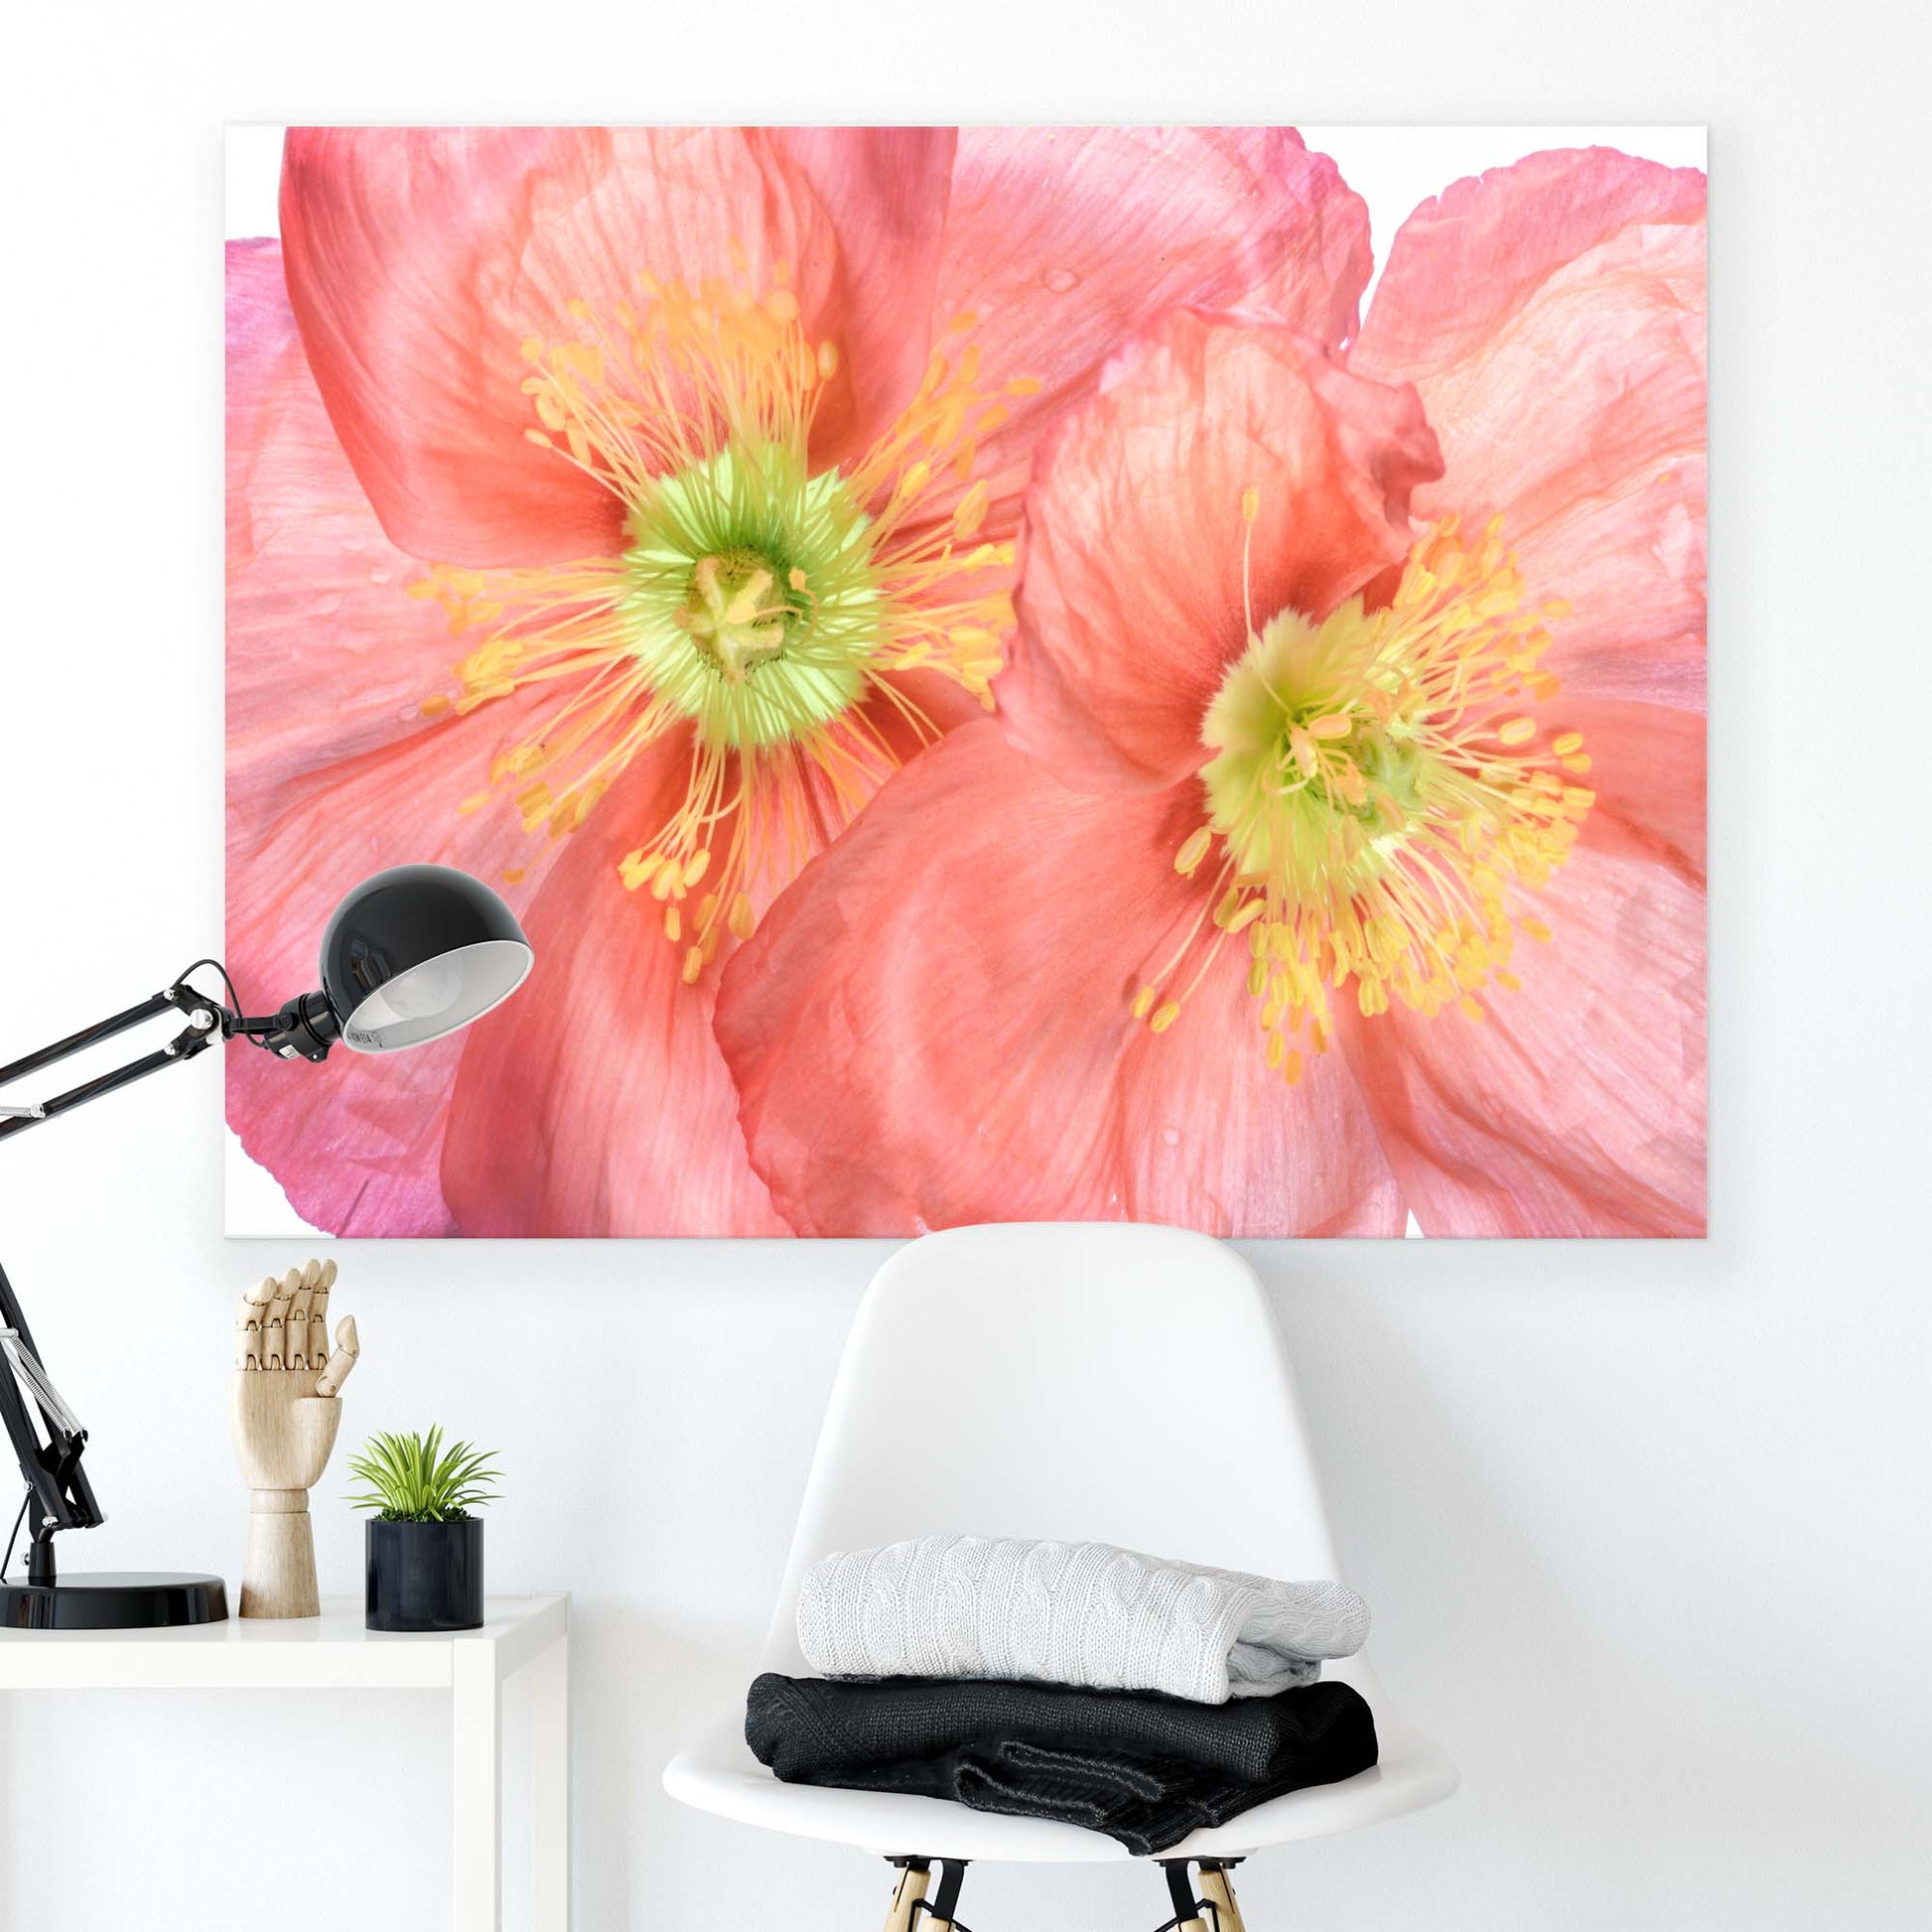 Papaver by Mandy Disher Canvas Print - USTAD HOME